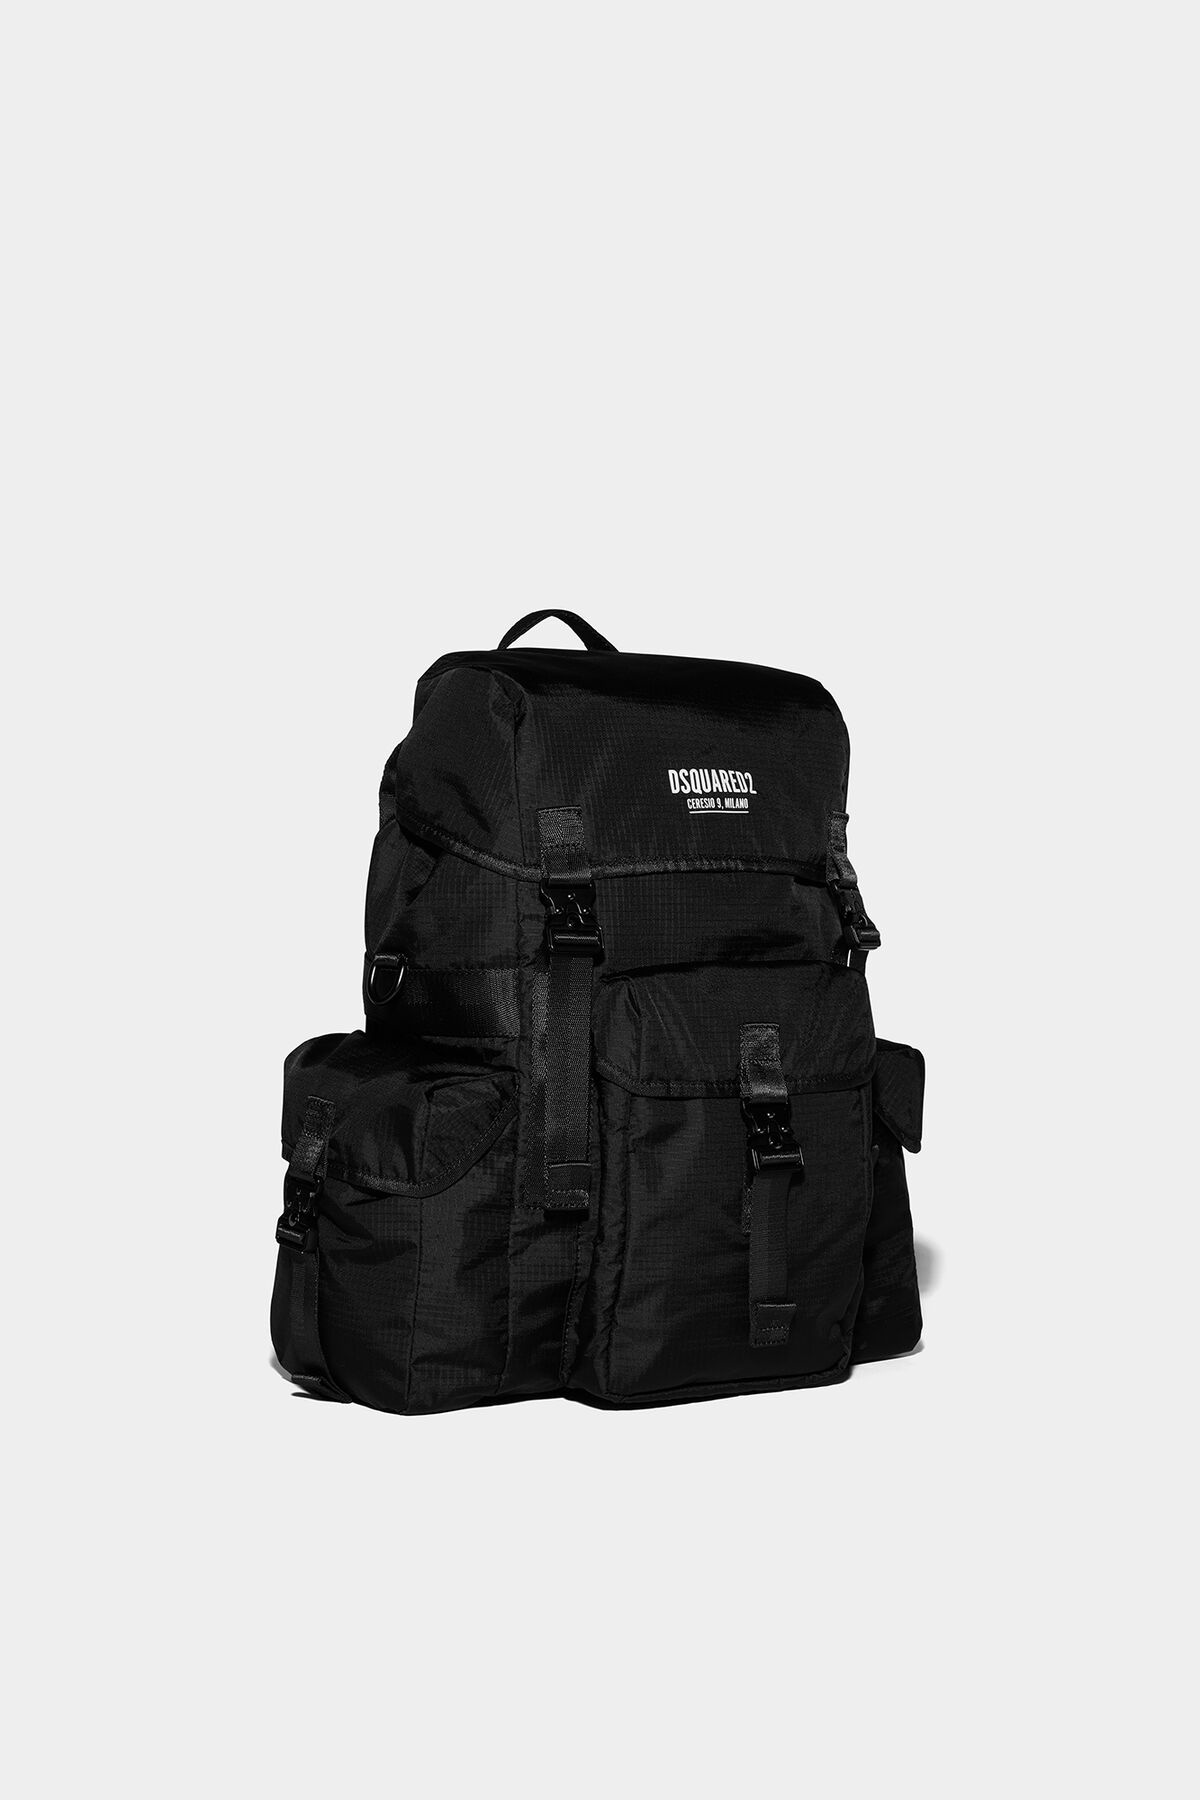 CERESIO 9 BACKPACK - 3